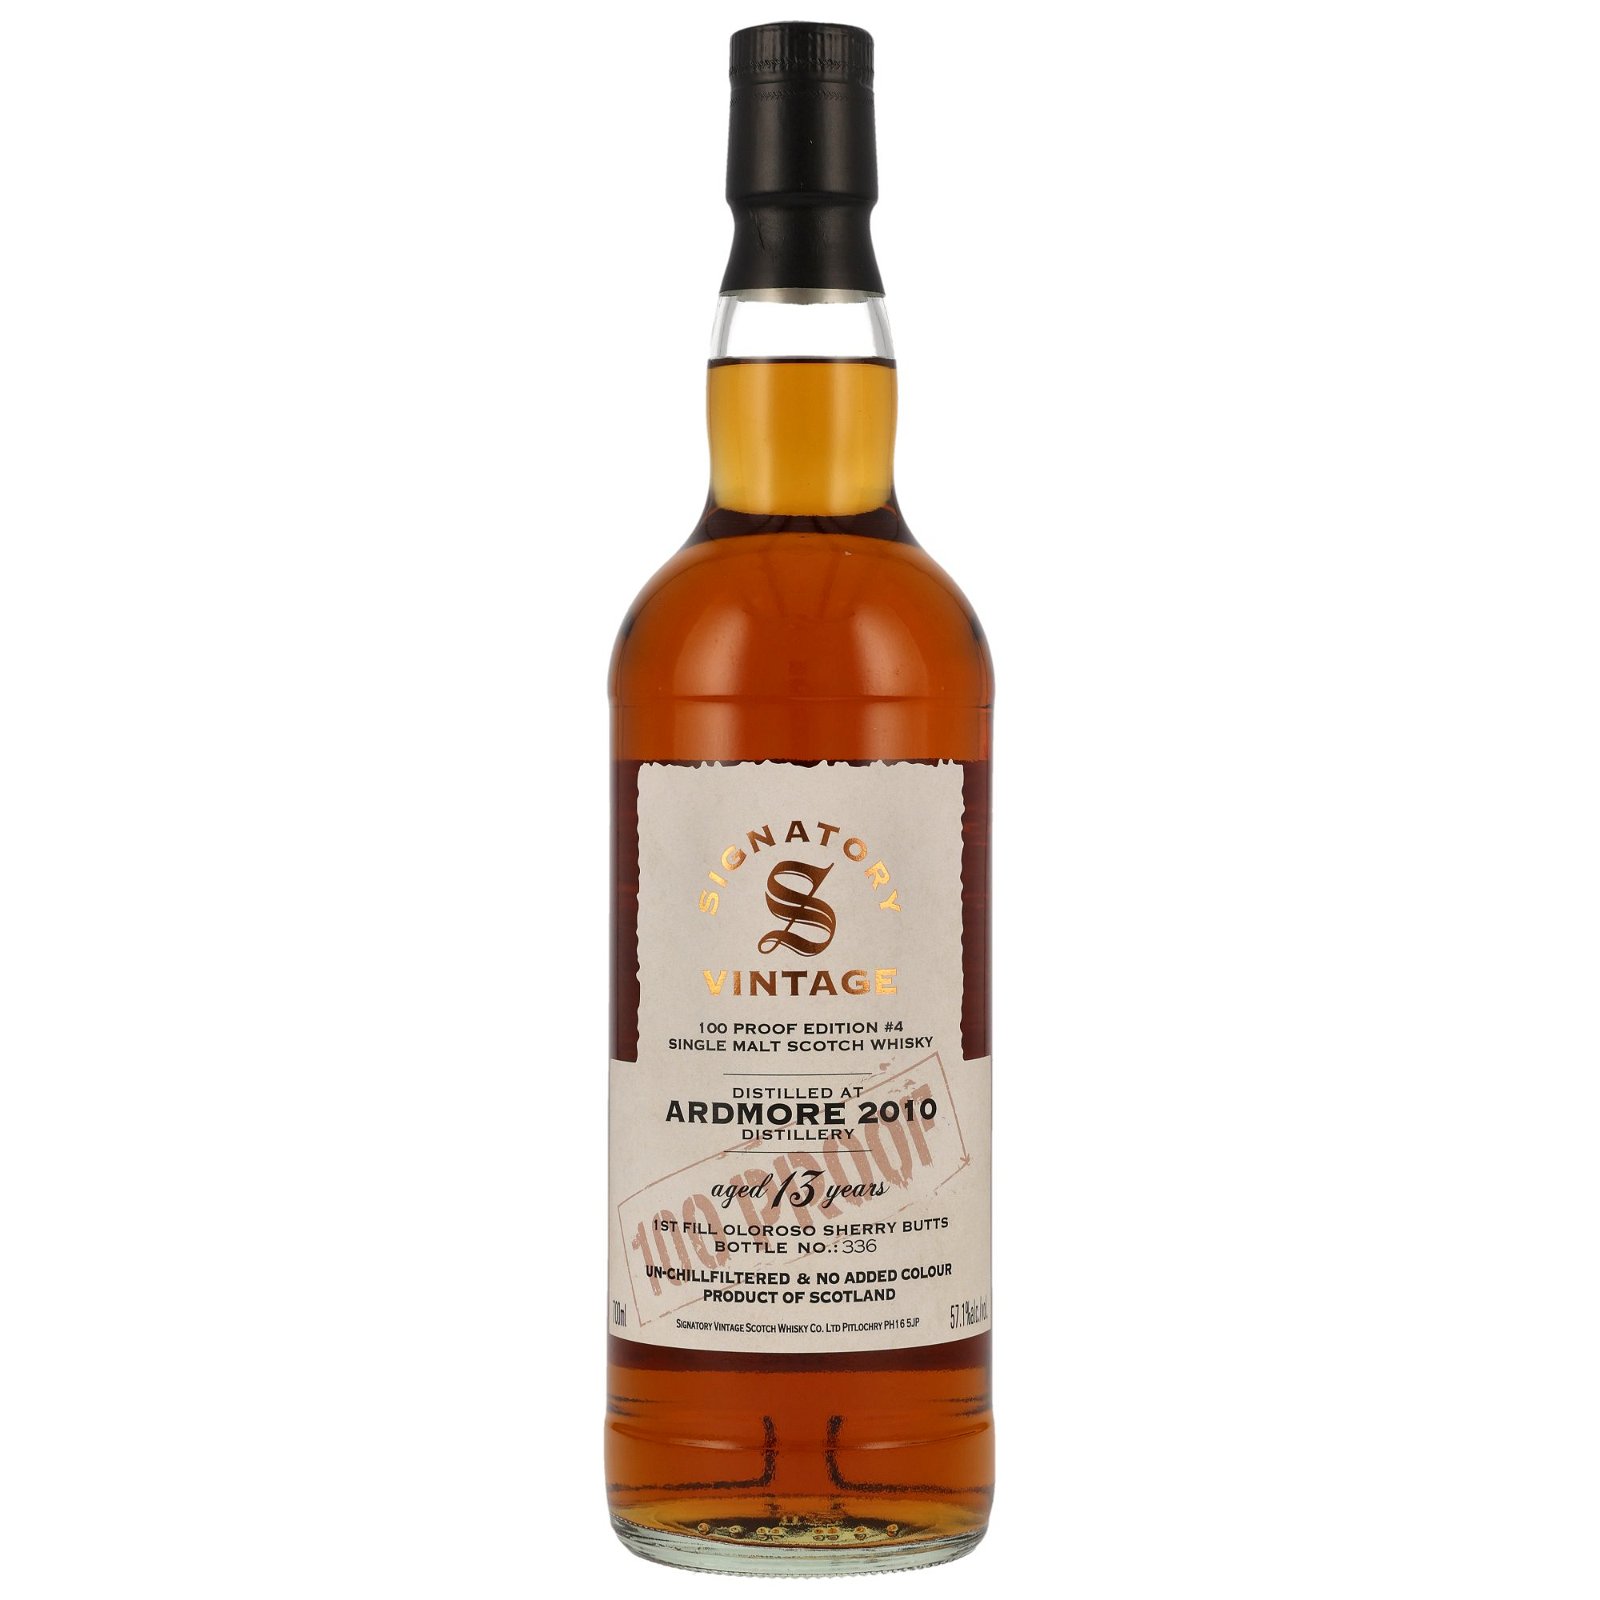 Ardmore 2010/2023 - 13 Jahre 1st Fill Oloroso Sherry Butts 100 Proof Edition #4 (Signatory)